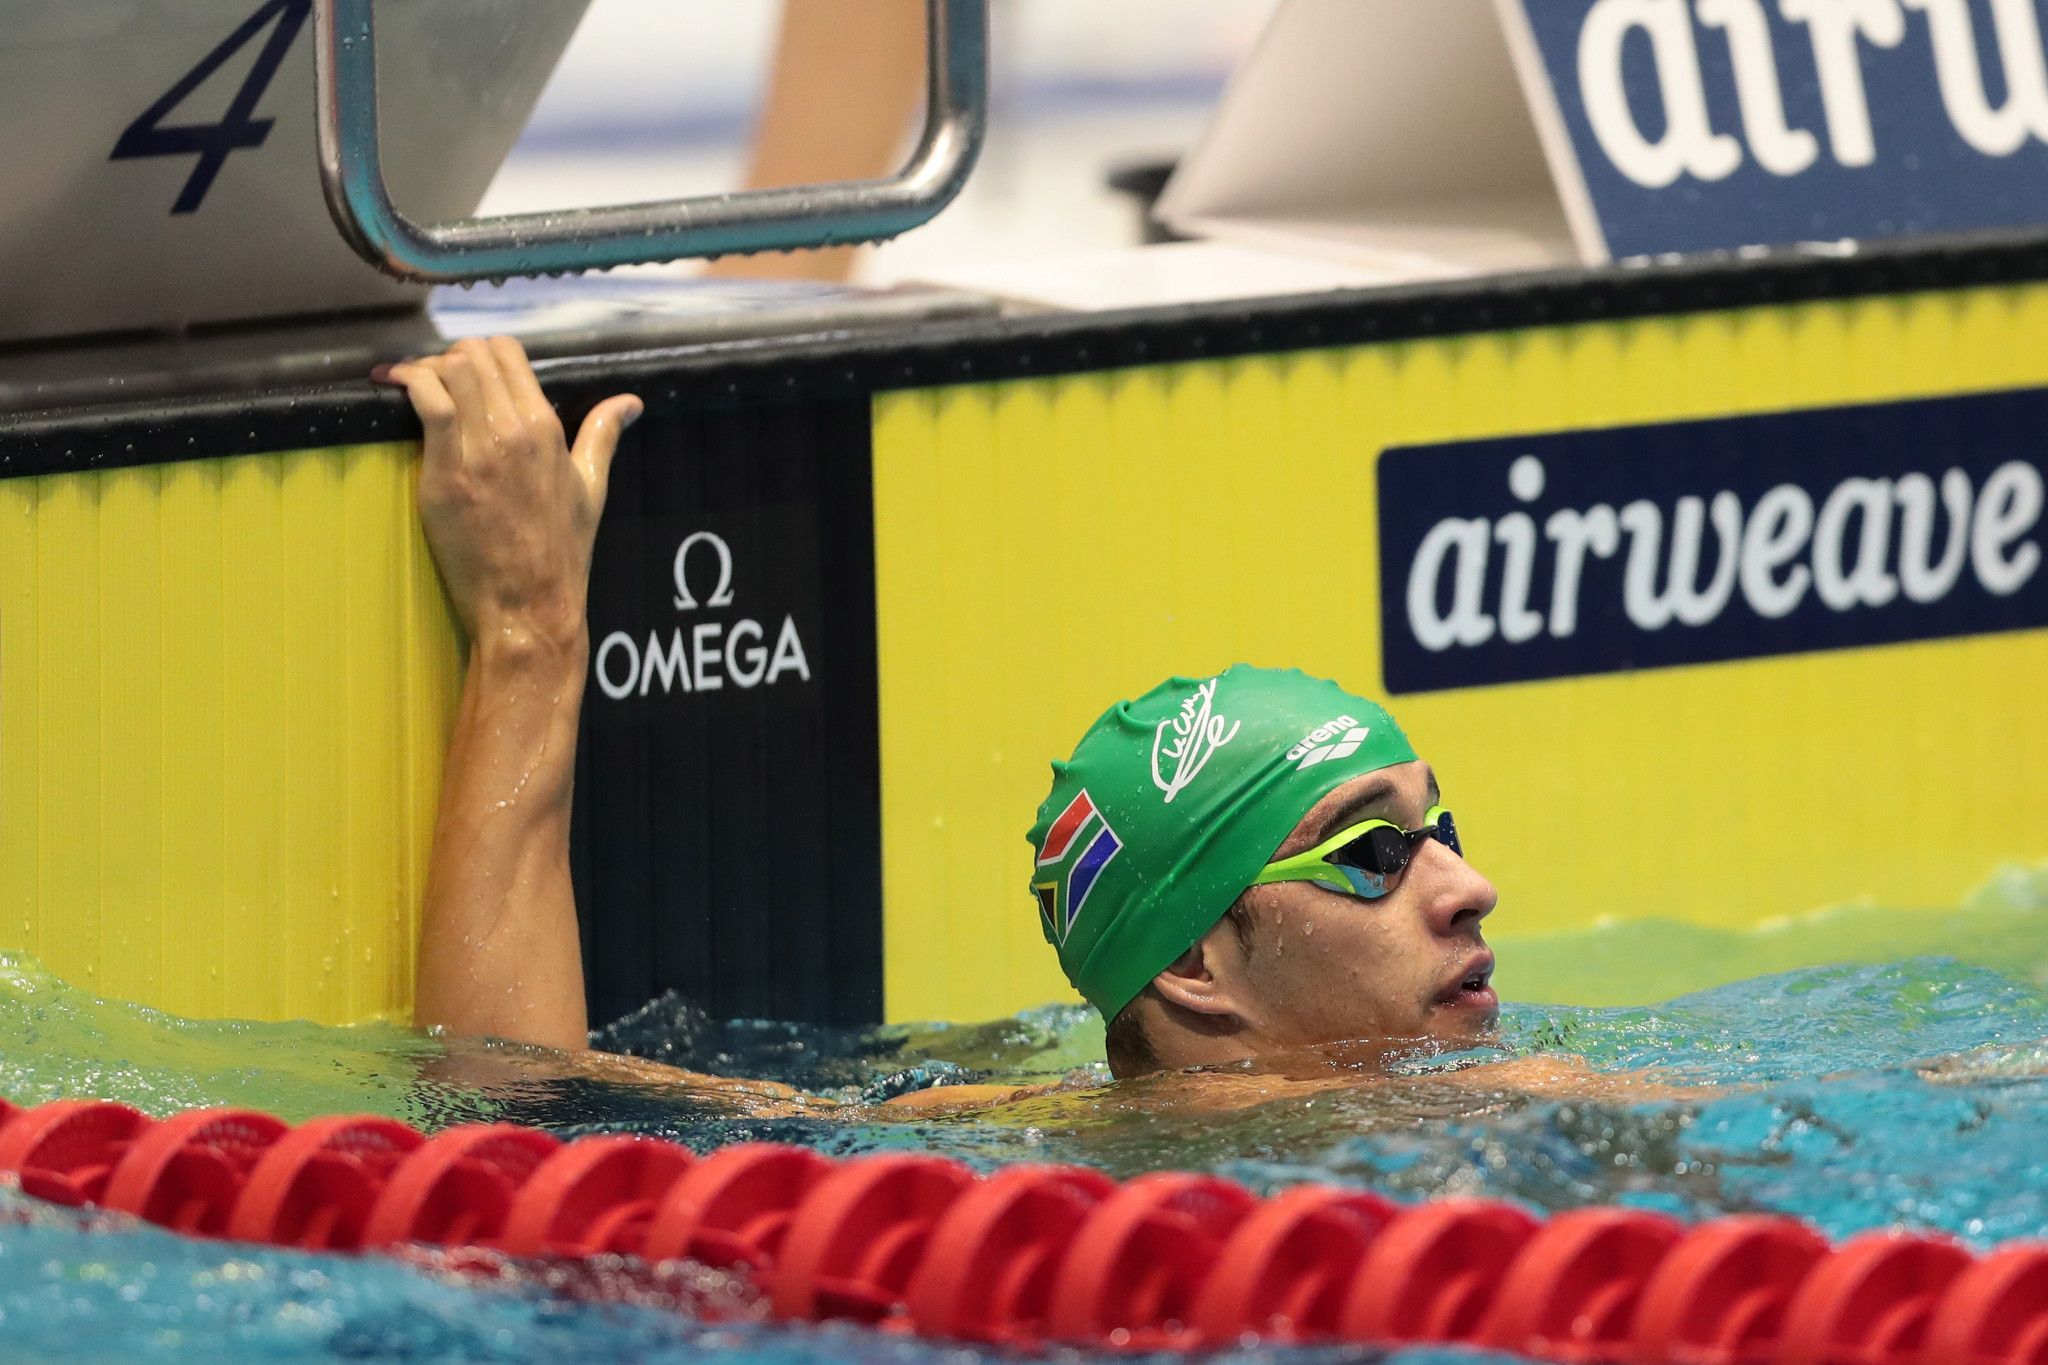 Olympic gold medallist Chad Le Clos of South Africa strengthened his advantage at the top of the overall leaderboard as he secured two victories in Beijing ©Getty Images